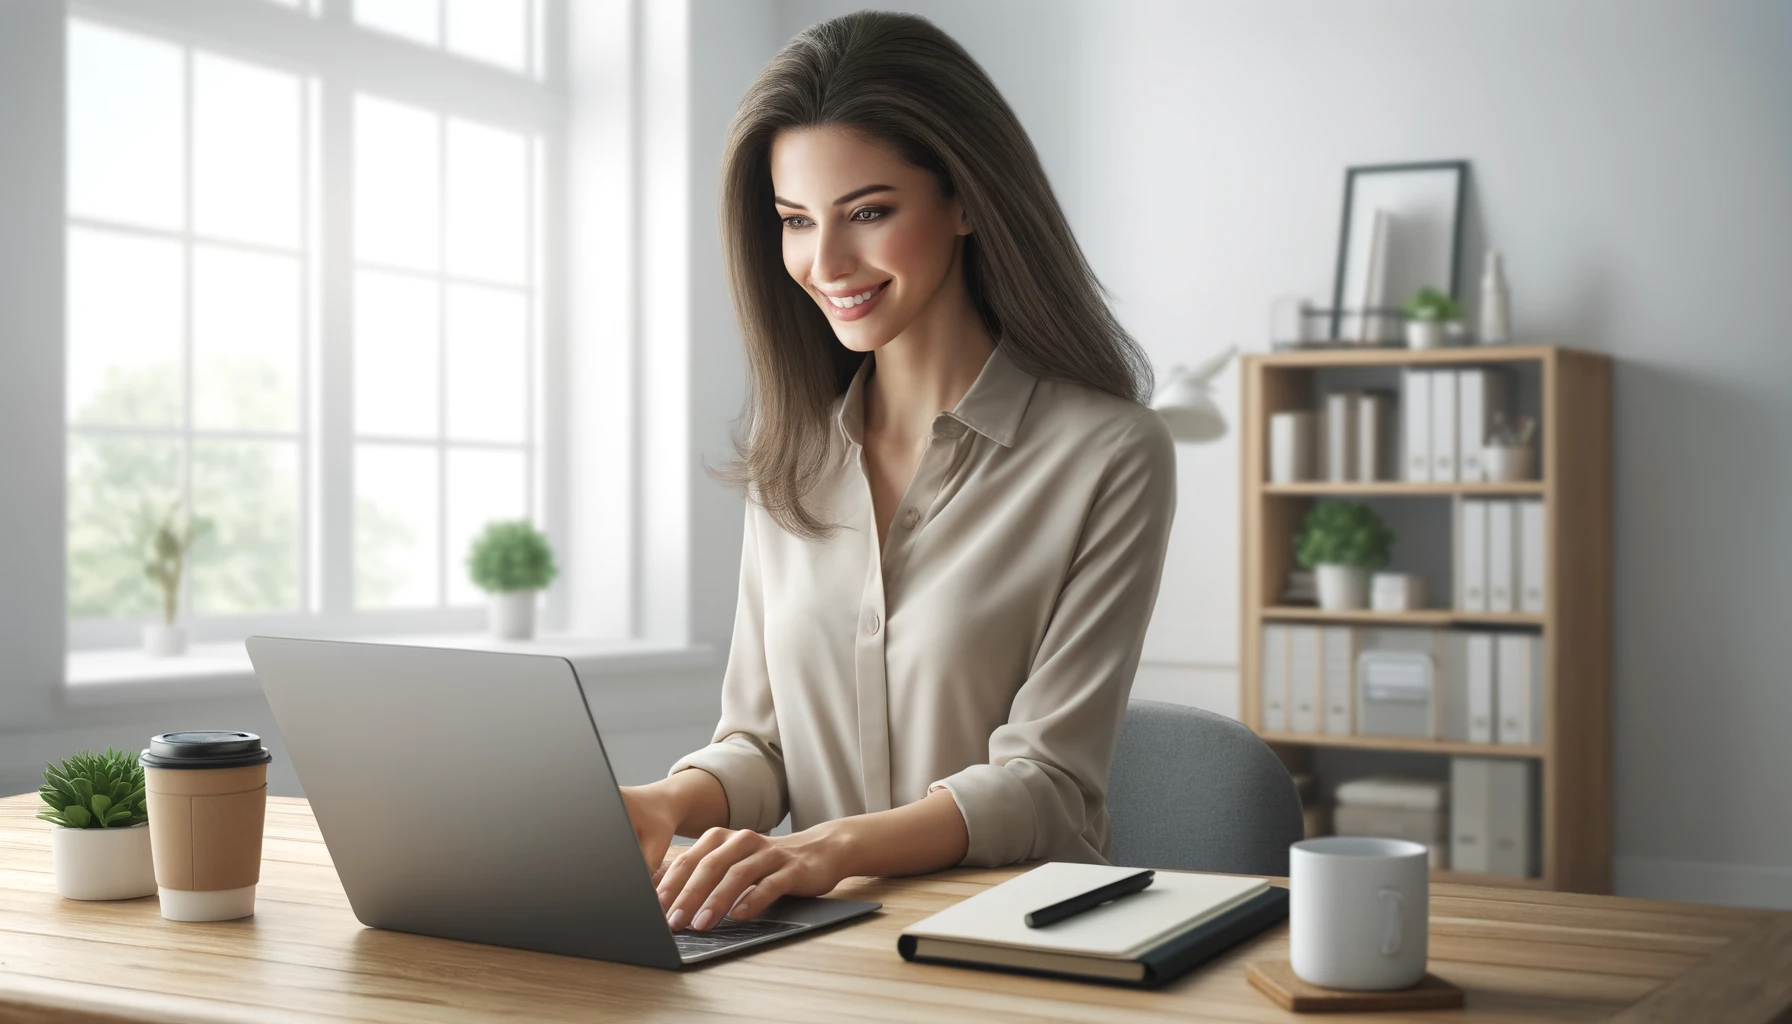 A realistic photograph of a woman working on a laptop in a bright, modern home office. The woman is smiling and looks engaged in her work. The background features a tidy desk with a notebook, coffee cup, and a plant, with a large window letting in natural light.